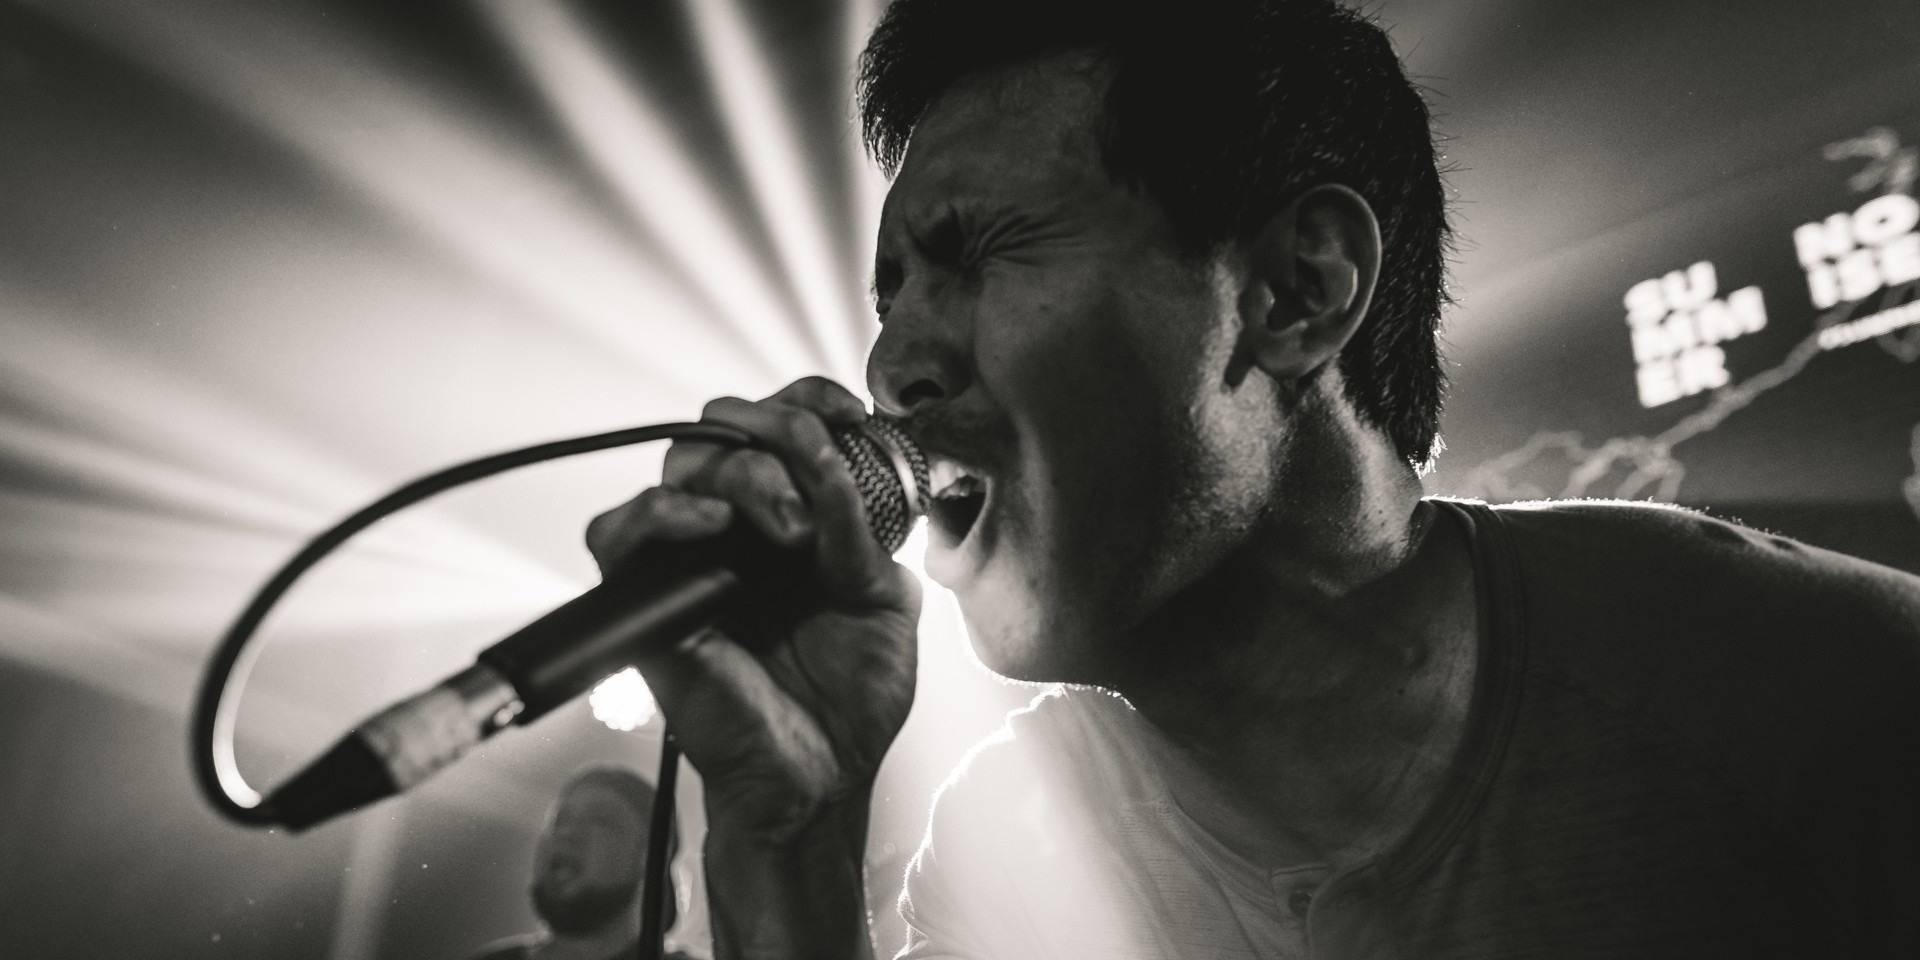 Dicta License calls for 'Bagong Bayani' in new single – listen